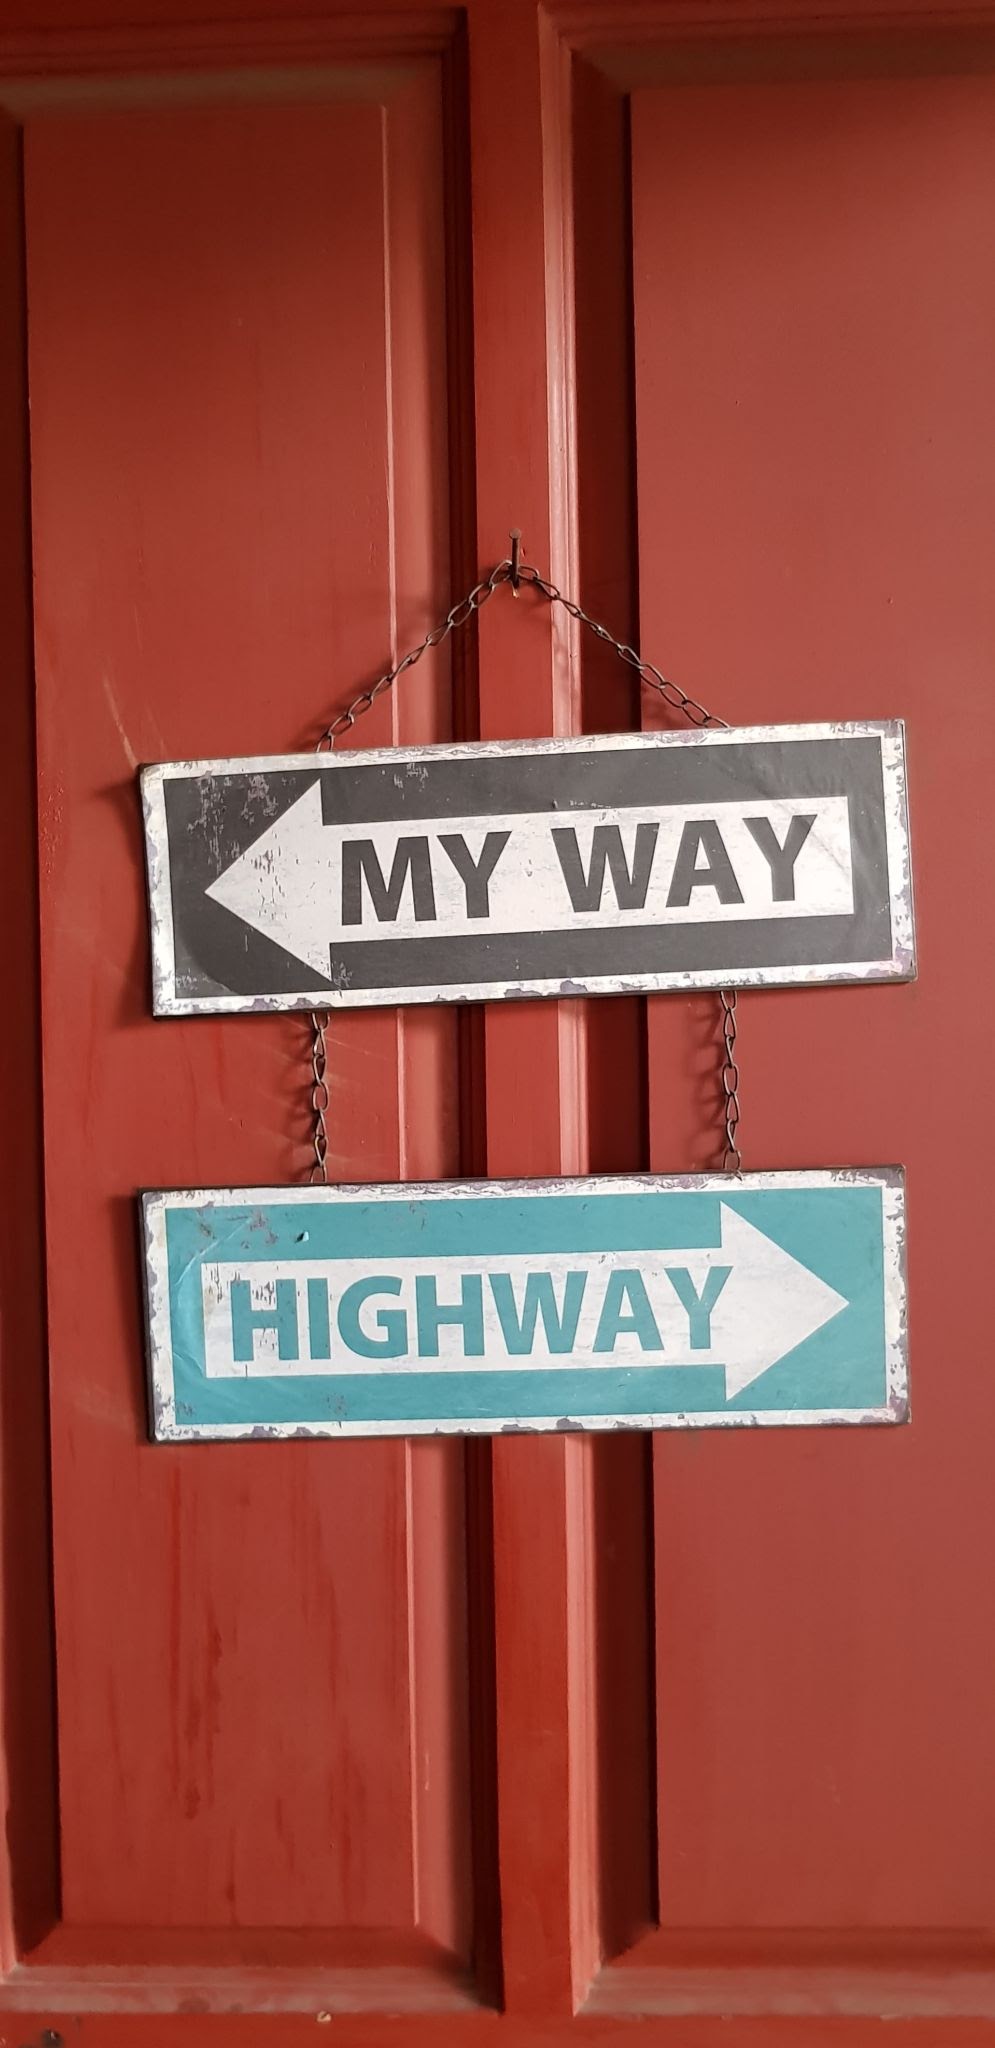 "My way" left facing arrow sign over a "highway" right facing arrow sign in front of a red door.